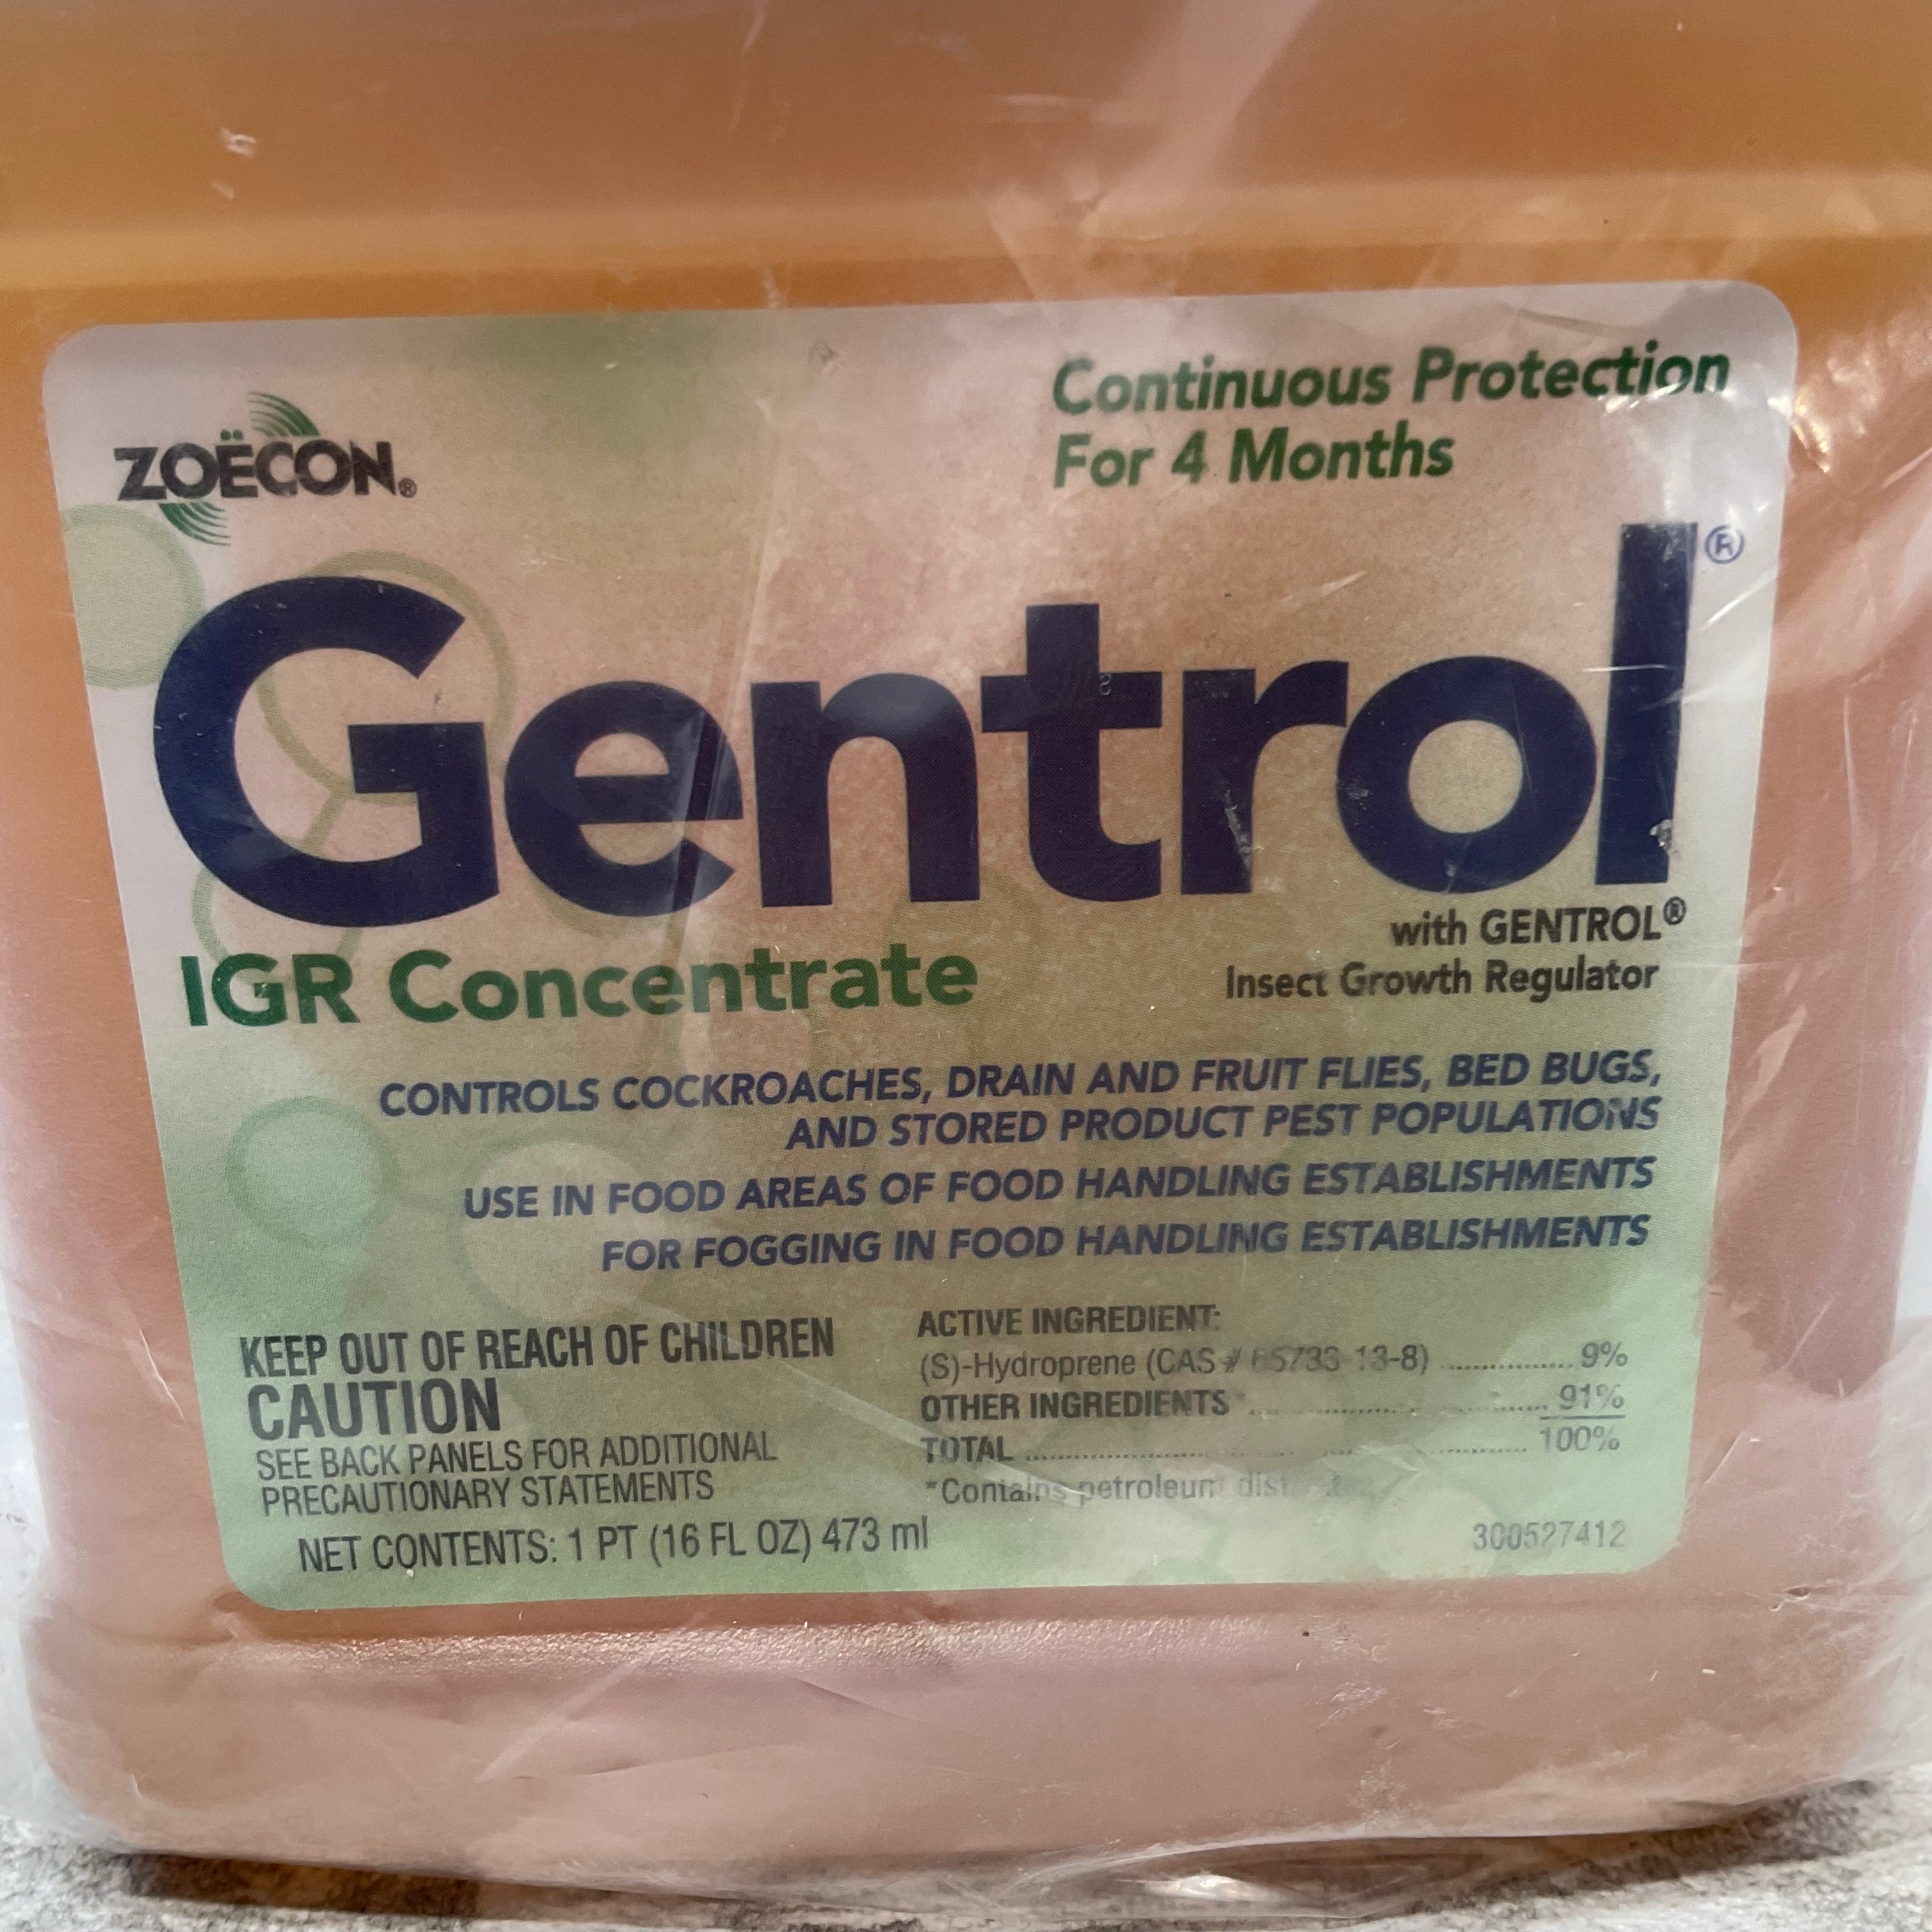 ZOECON 619907 Gentrol IGR Concentrate Insect Growth Regulator, 16 oz (7523076866286)